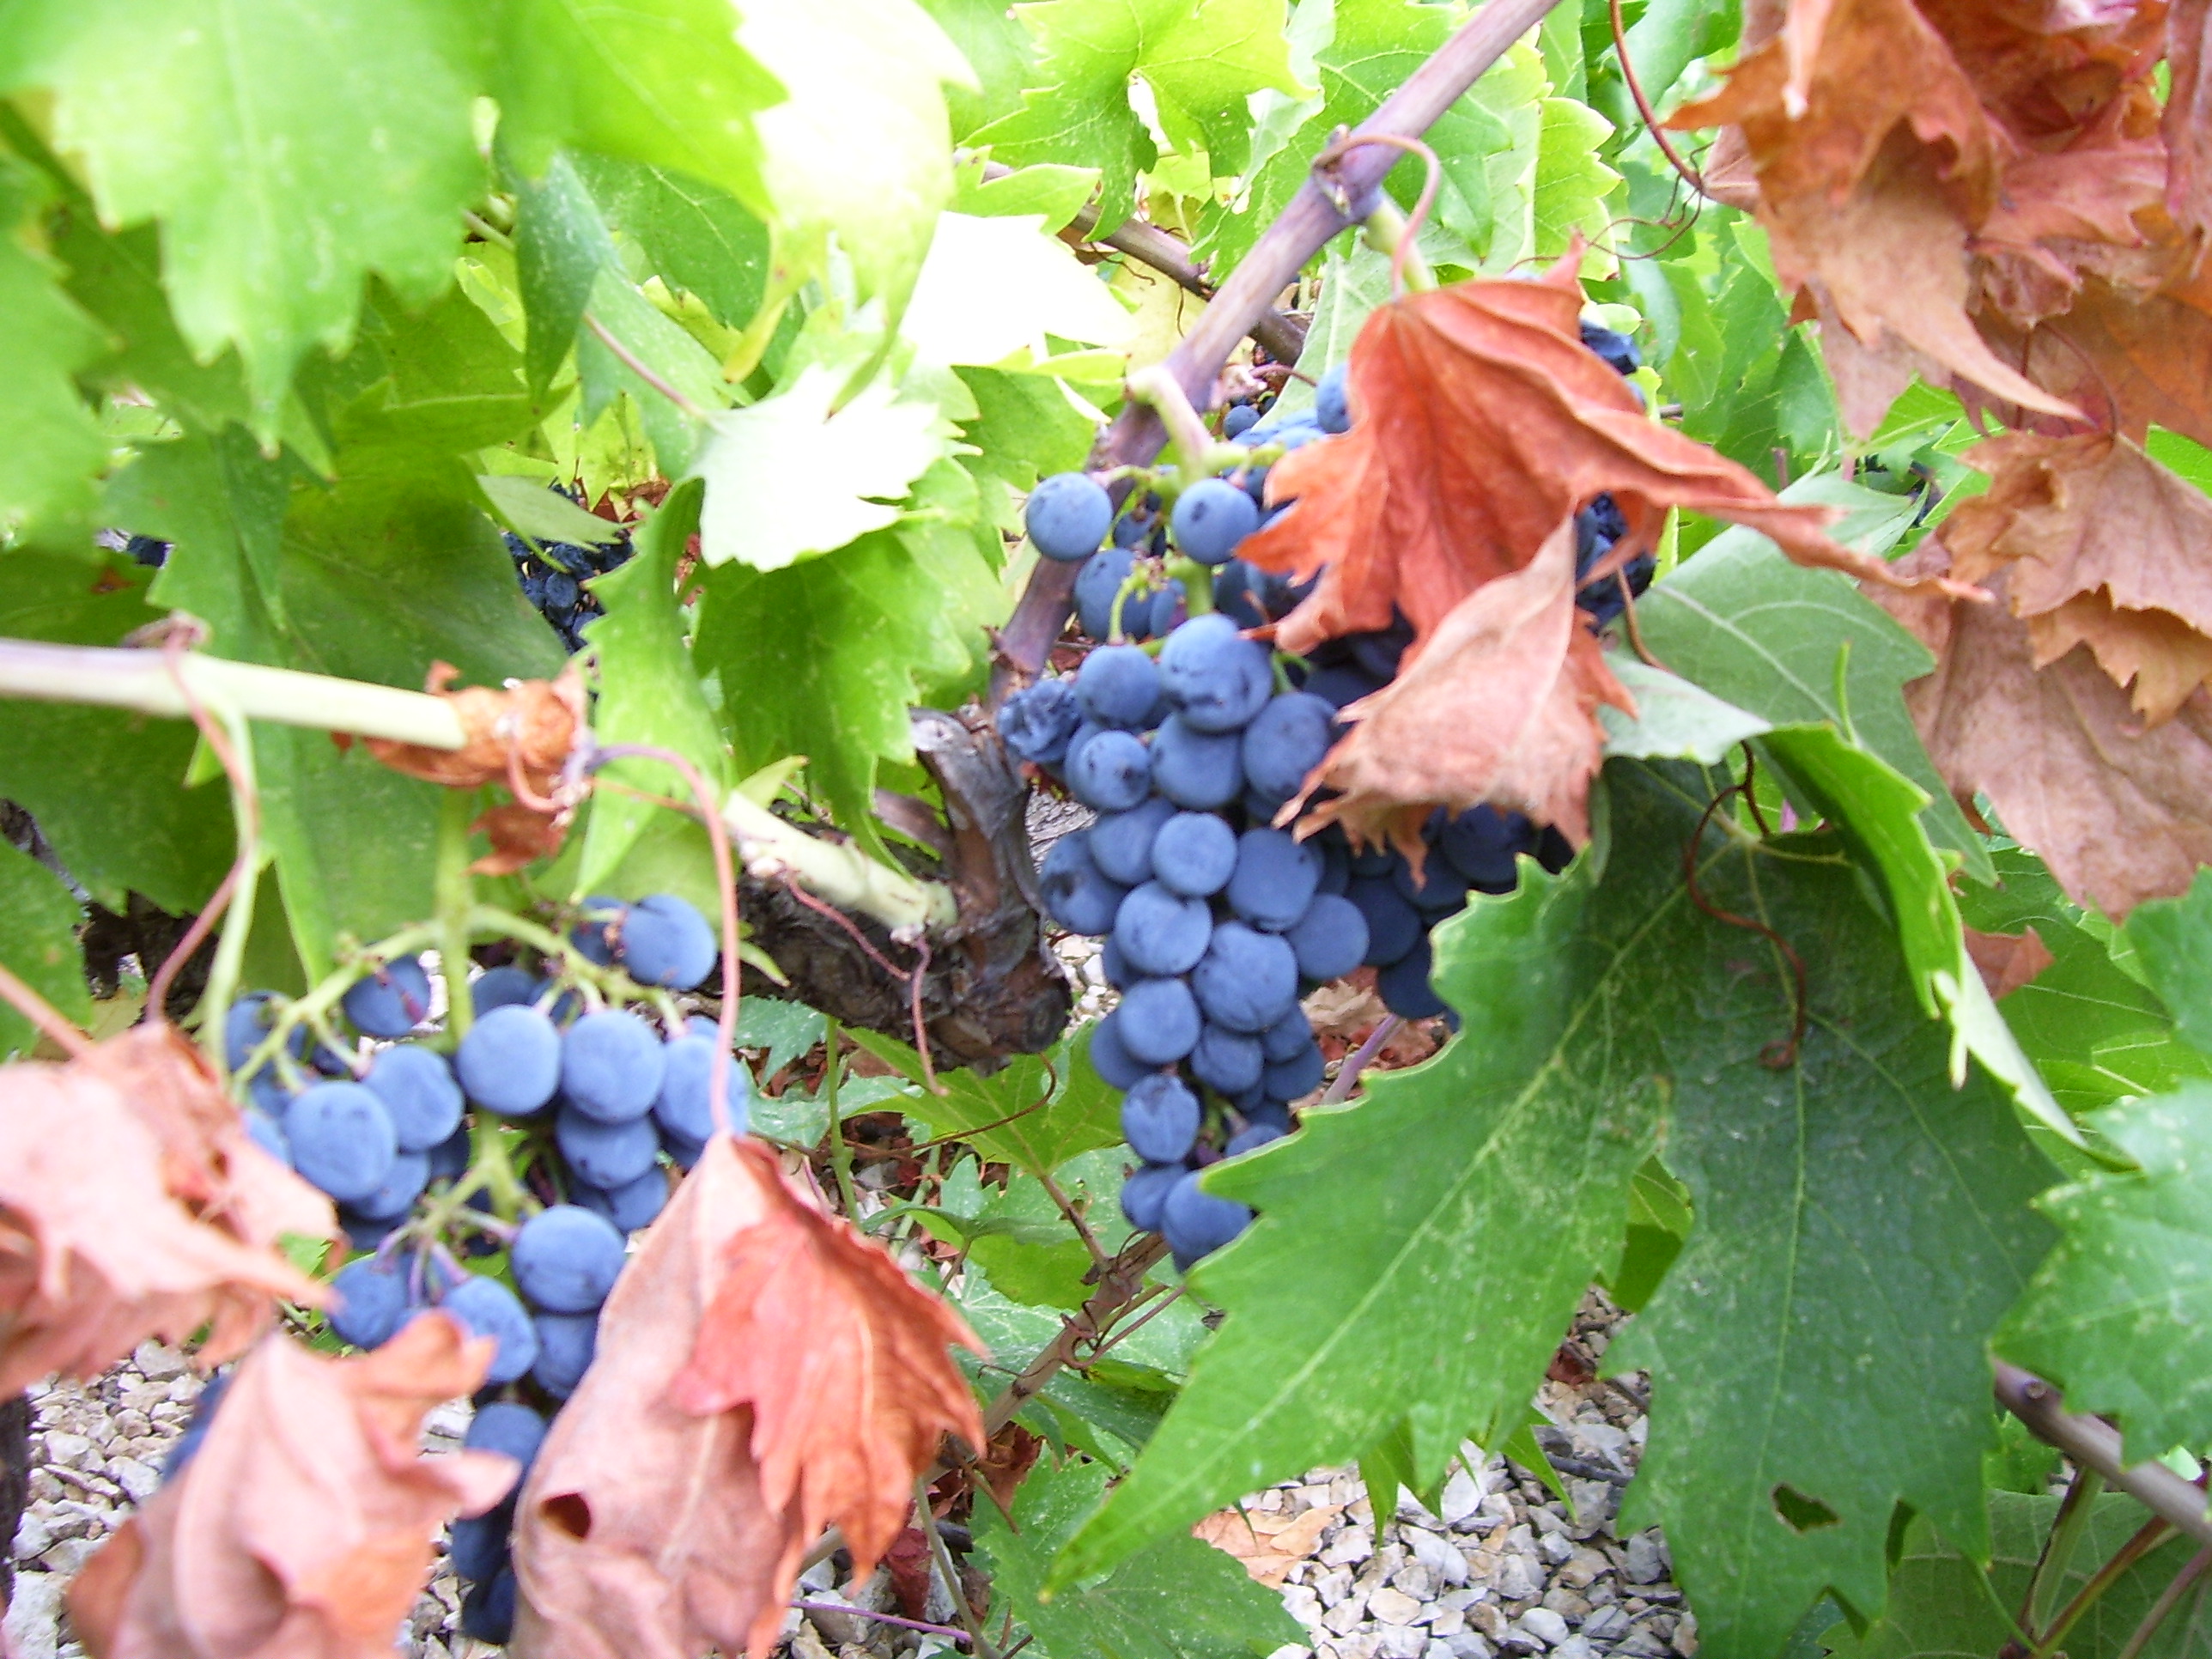 Plavac Mali, is a red grape indigenous to Dalmatia. Photo by Cliff Rames.